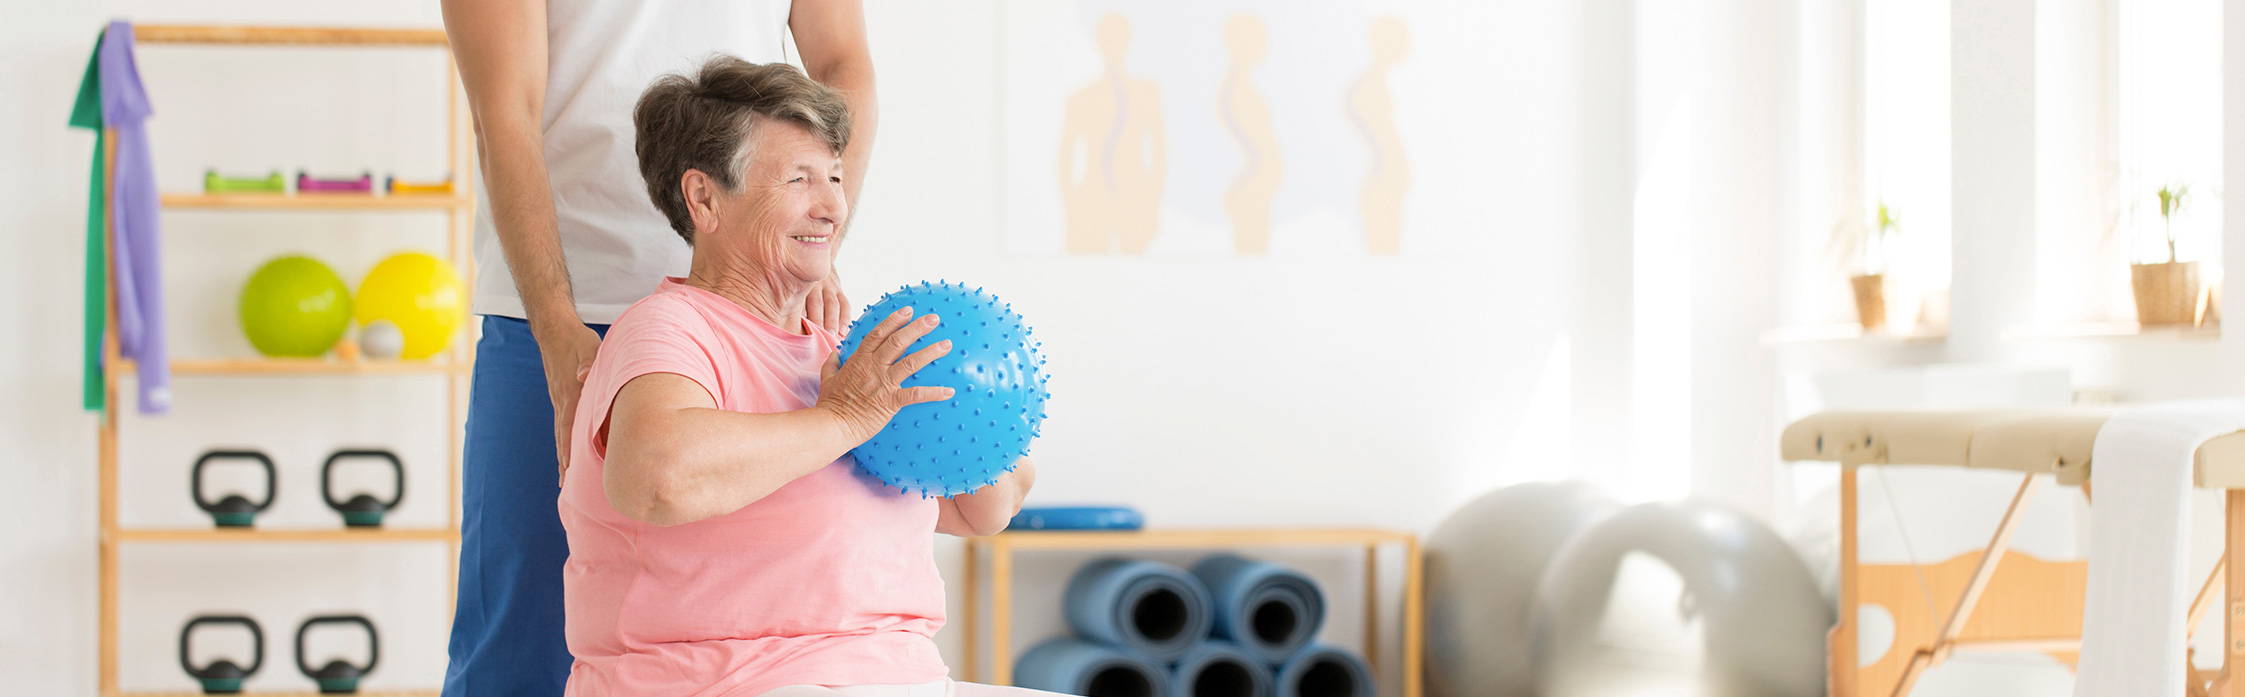 elderly lady holding a ball exercising with pink top on in a home gym